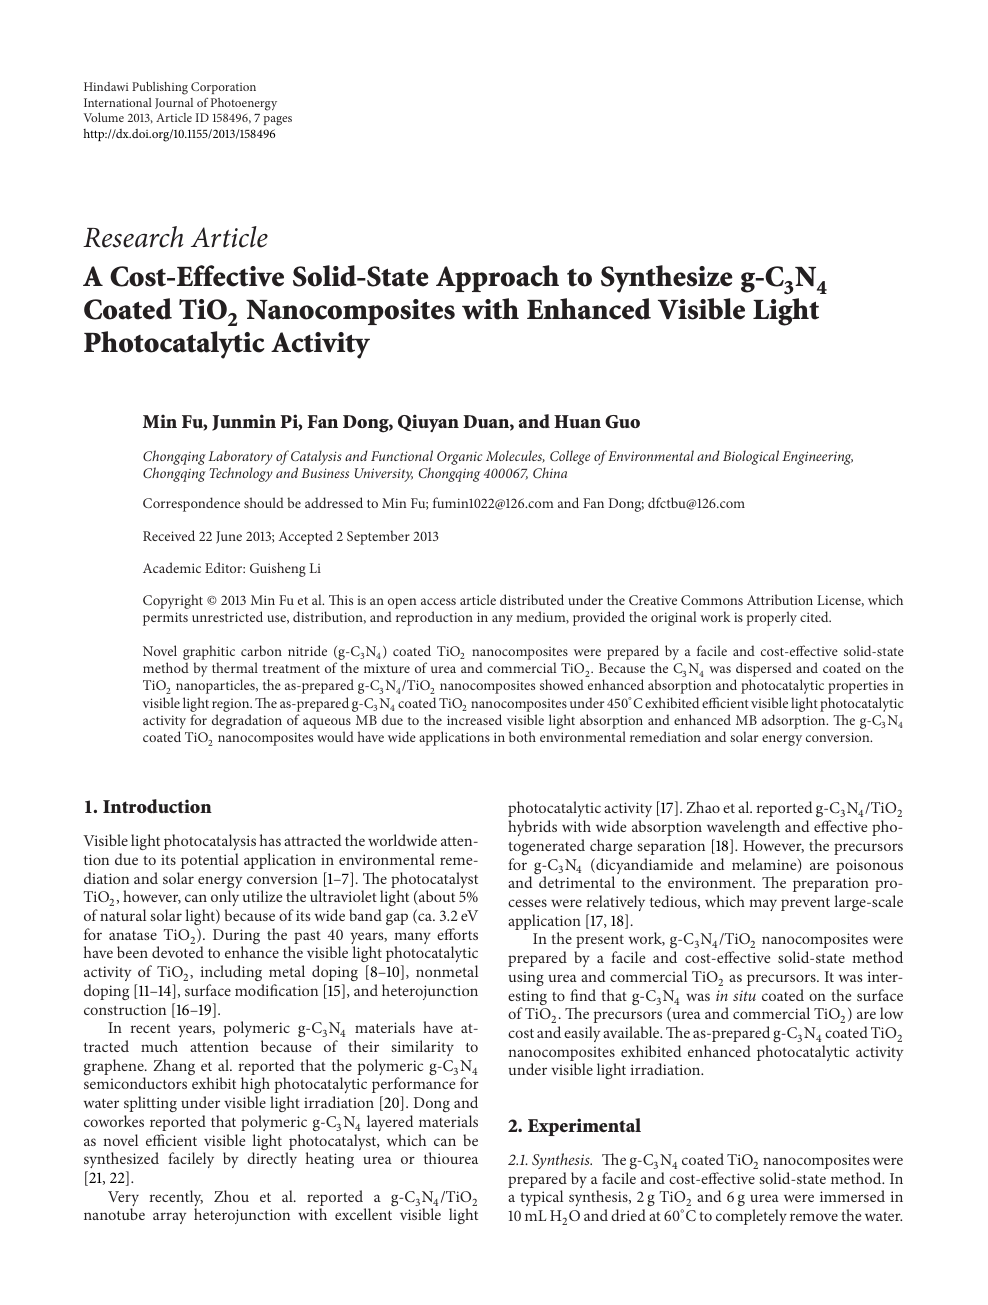 A Cost Effective Solid State Approach To Synthesize G C3n4 Coated Tio2 Nanocomposites With Enhanced Visible Light Photocatalytic Activity Topic Of Research Paper In Chemical Engineering Download Scholarly Article Pdf And Read For Free